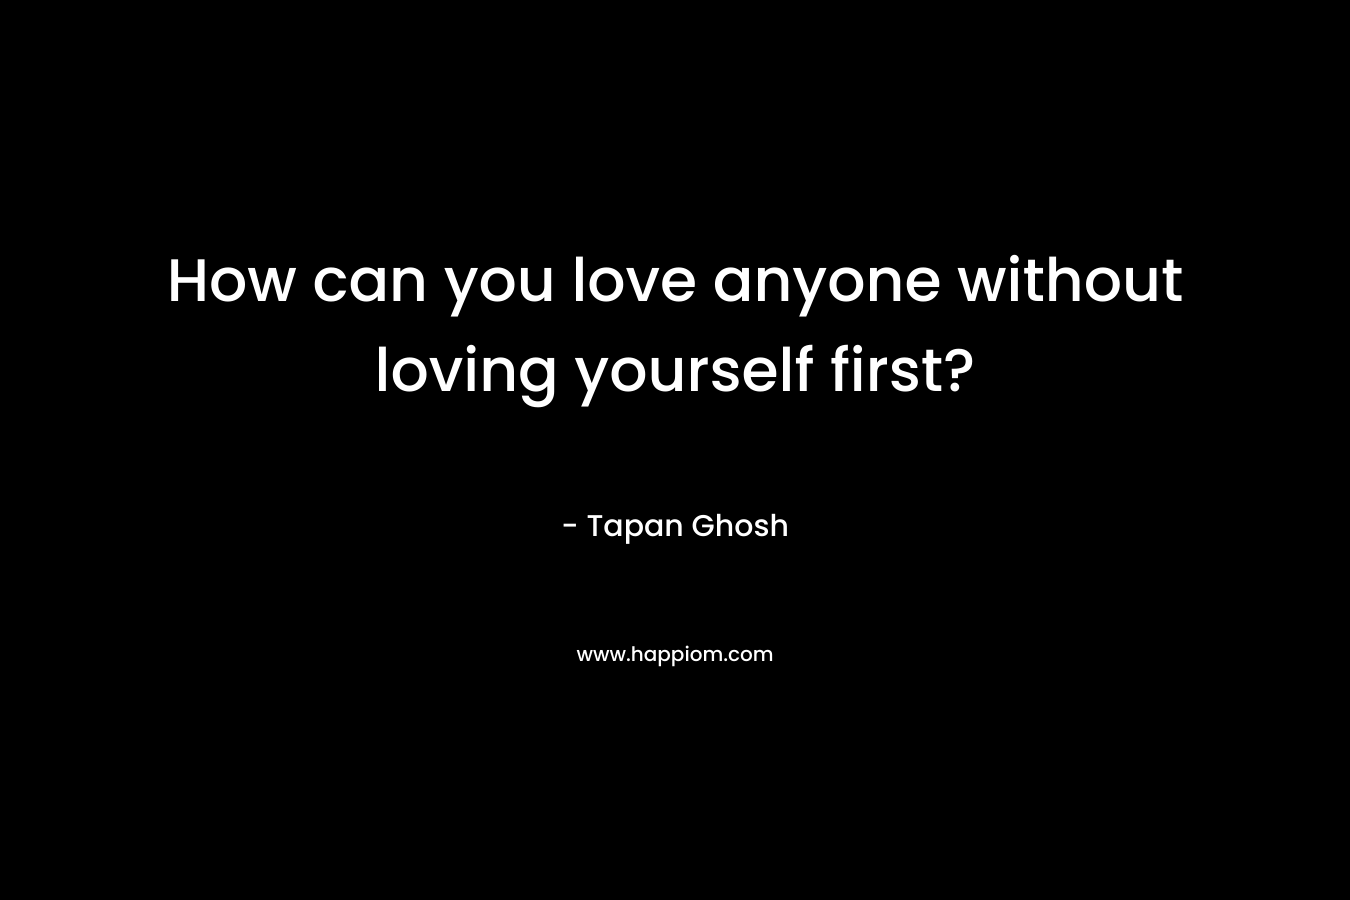 How can you love anyone without loving yourself first?